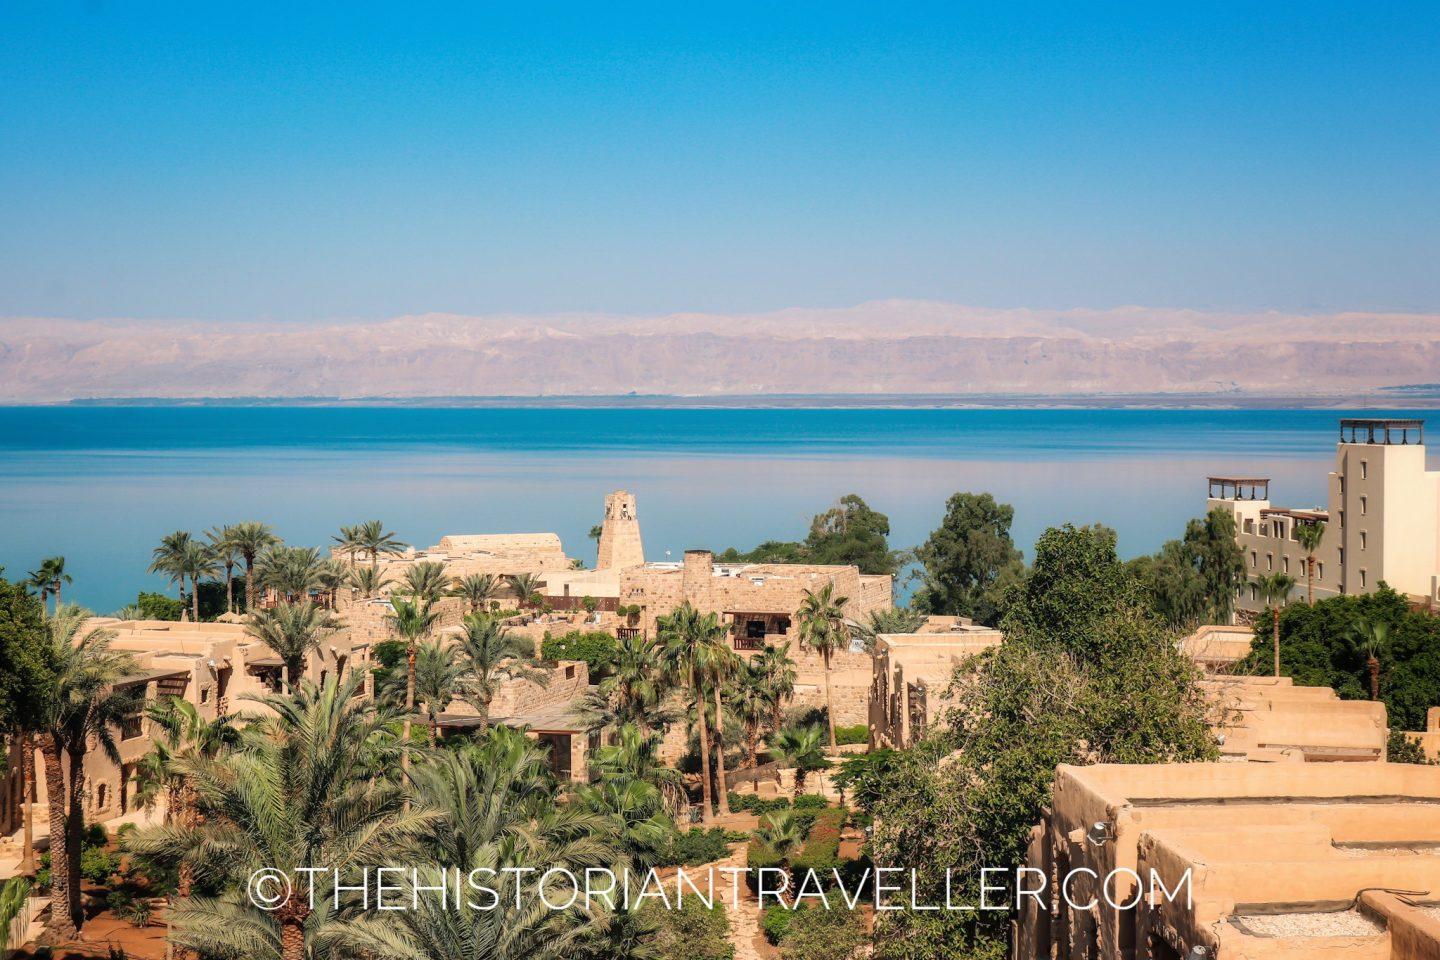 Guide to Wadi Mujib Jordan. View from our window at the Movenpick Dead Sea. On a clear day you can see Israel on the other side of the Dead Sea!